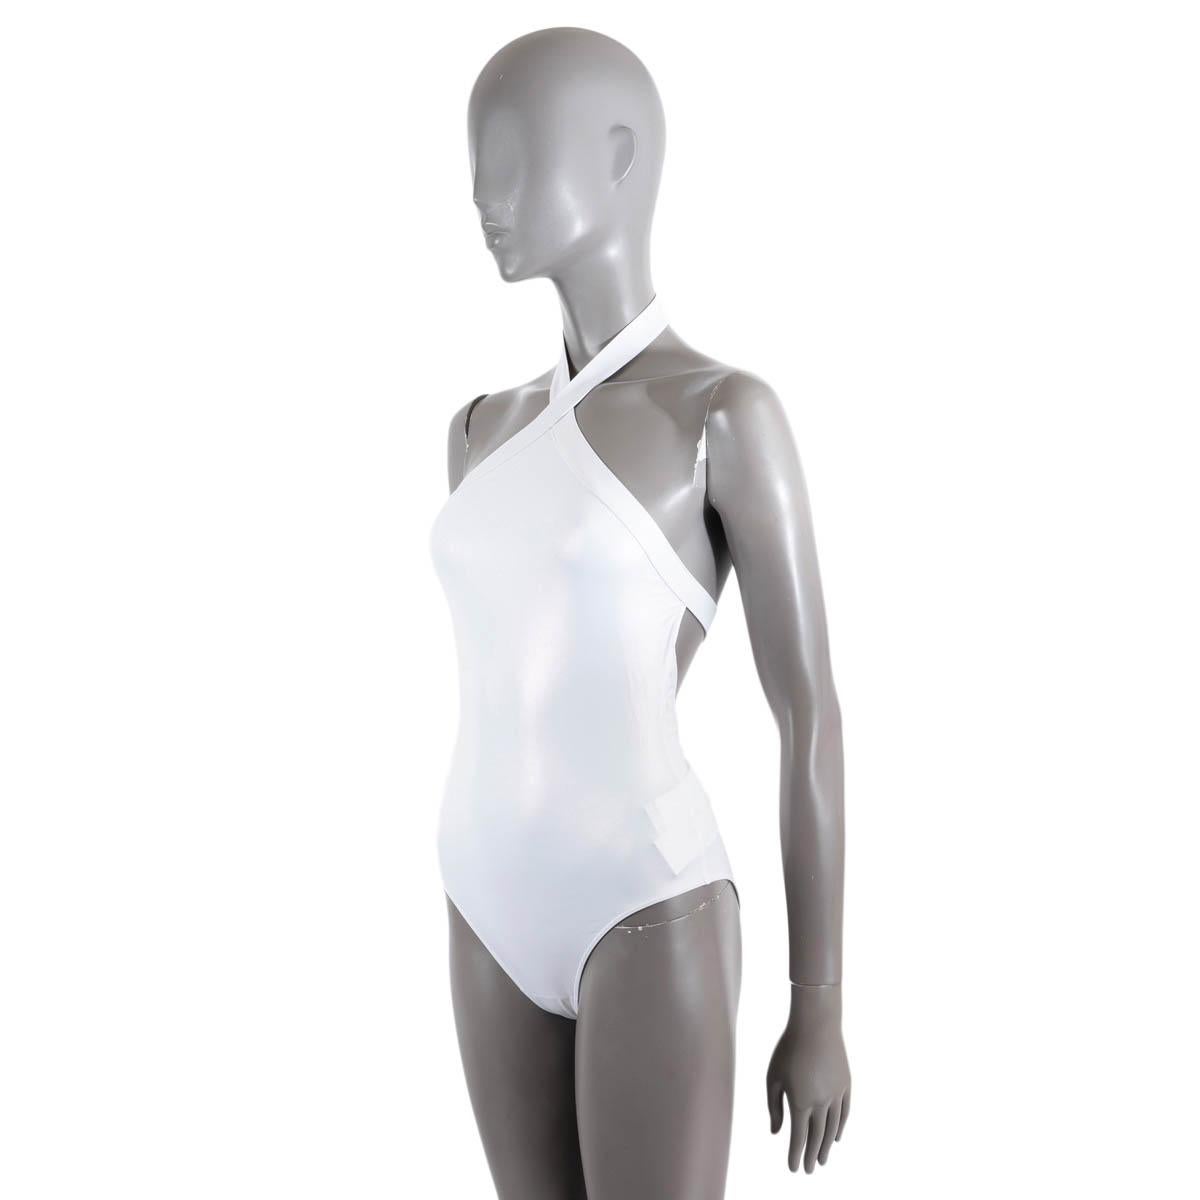 100% authentic Alaïa one-piece halter neck open back swimsuit, made from iridescent white stretch-polyamide (82%) and elasttane (18%). Hook fastening at neck and back. Brand new with tags. Comes with terry cloth dust bag.

Measurements
Tag